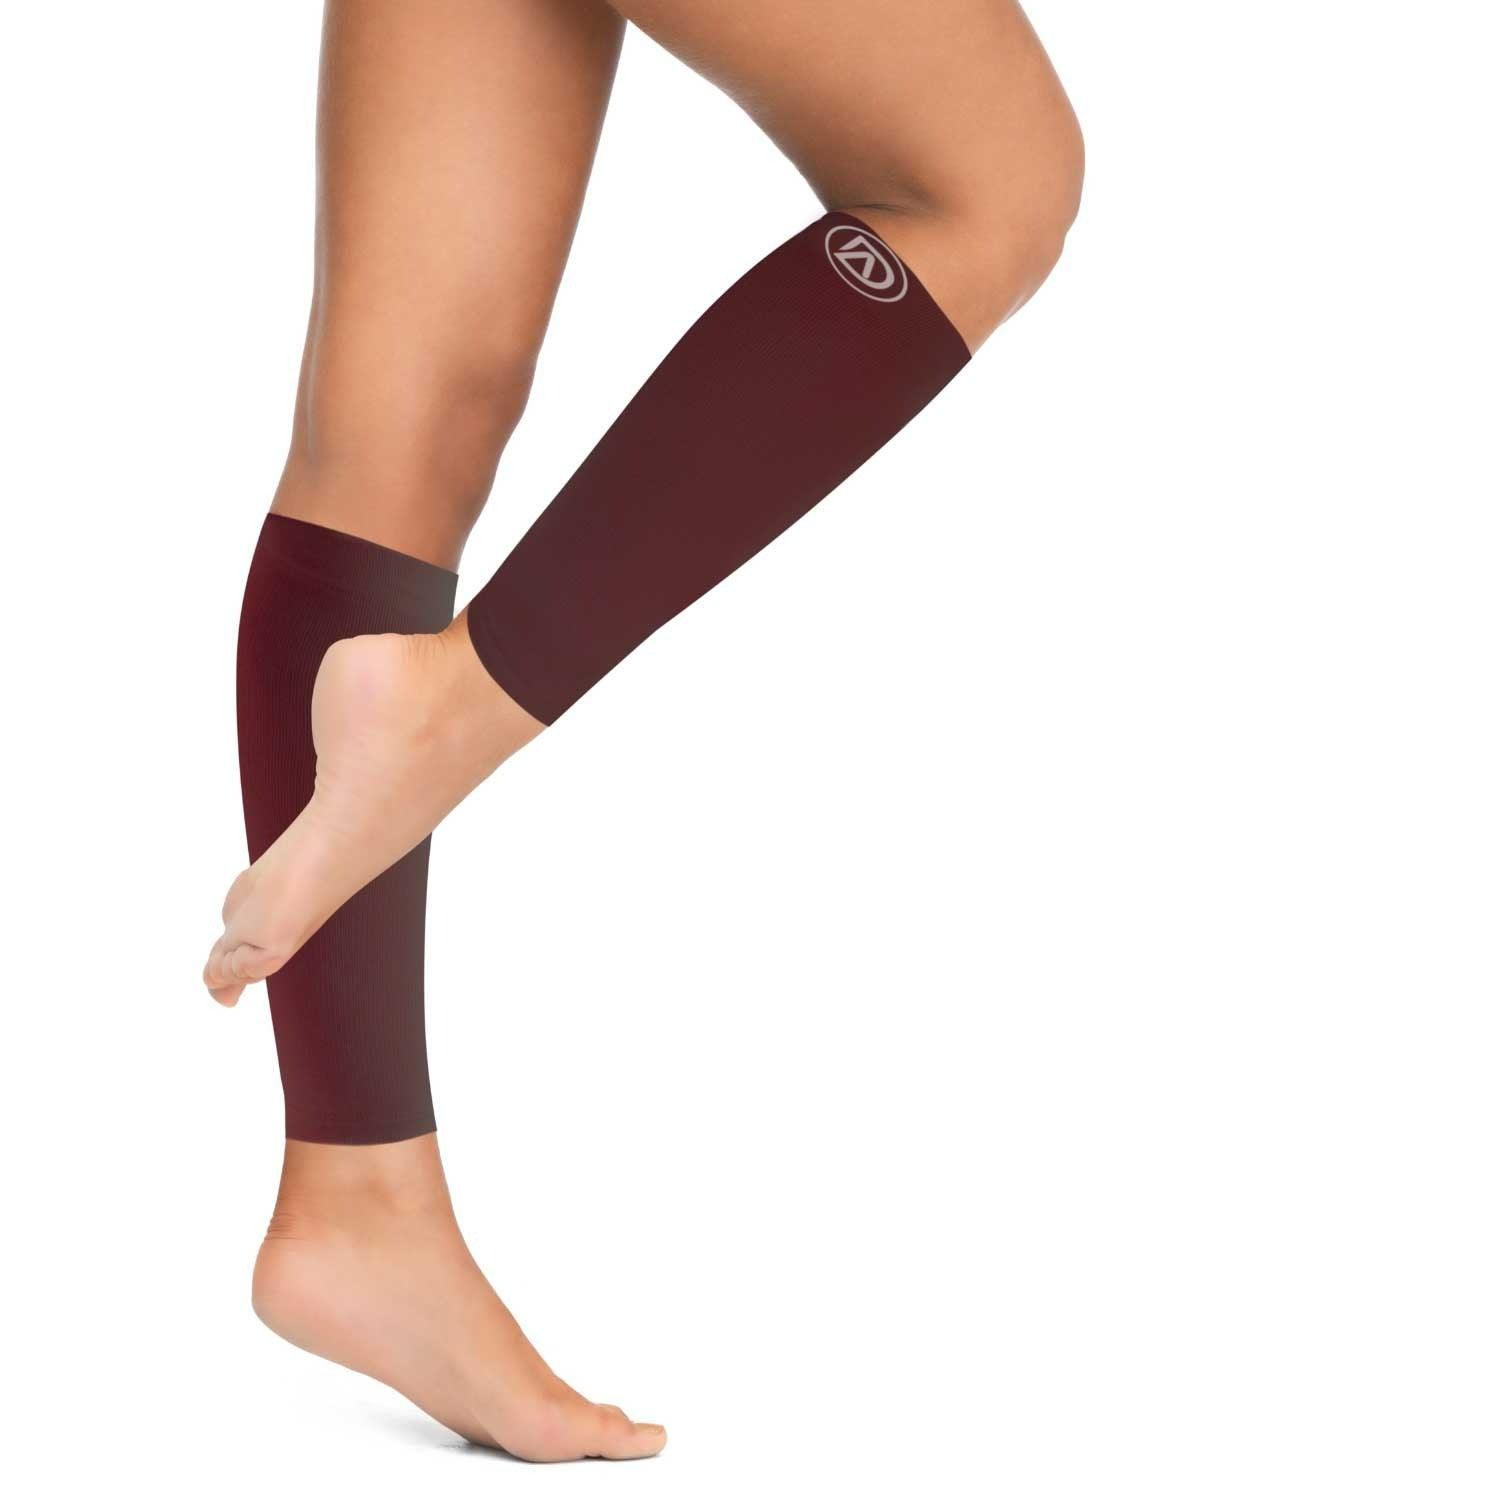 WIDE Calf Compression Sleeves 20-30 mmHg, Plus Size by Dominion Activ